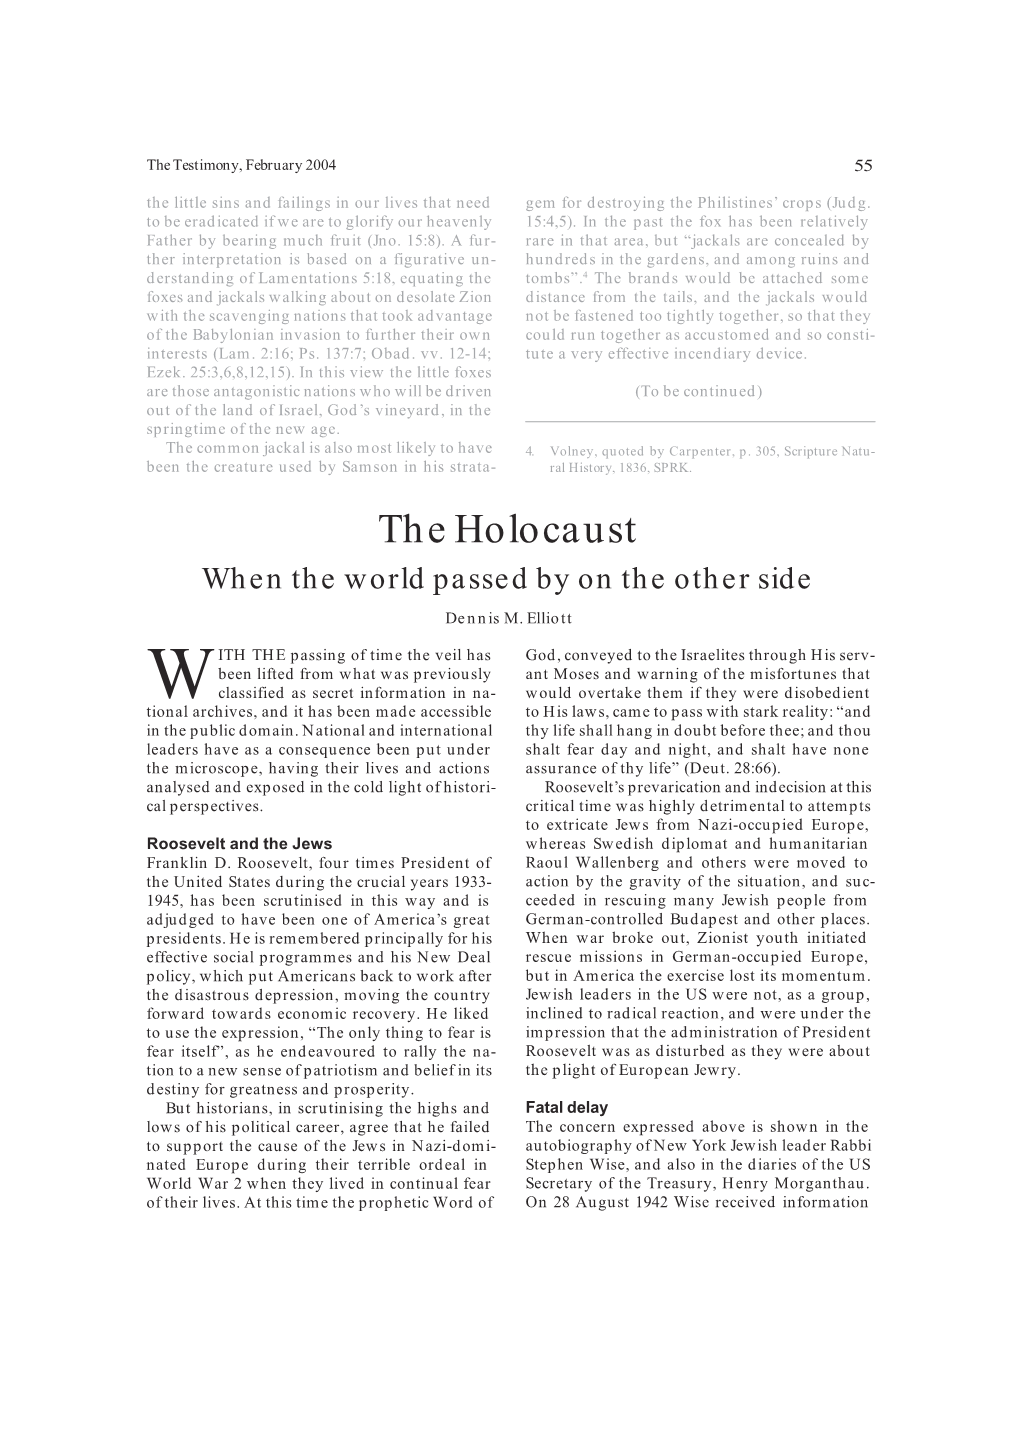 The Holocaust When the World Passed by on the Other Side Dennis M